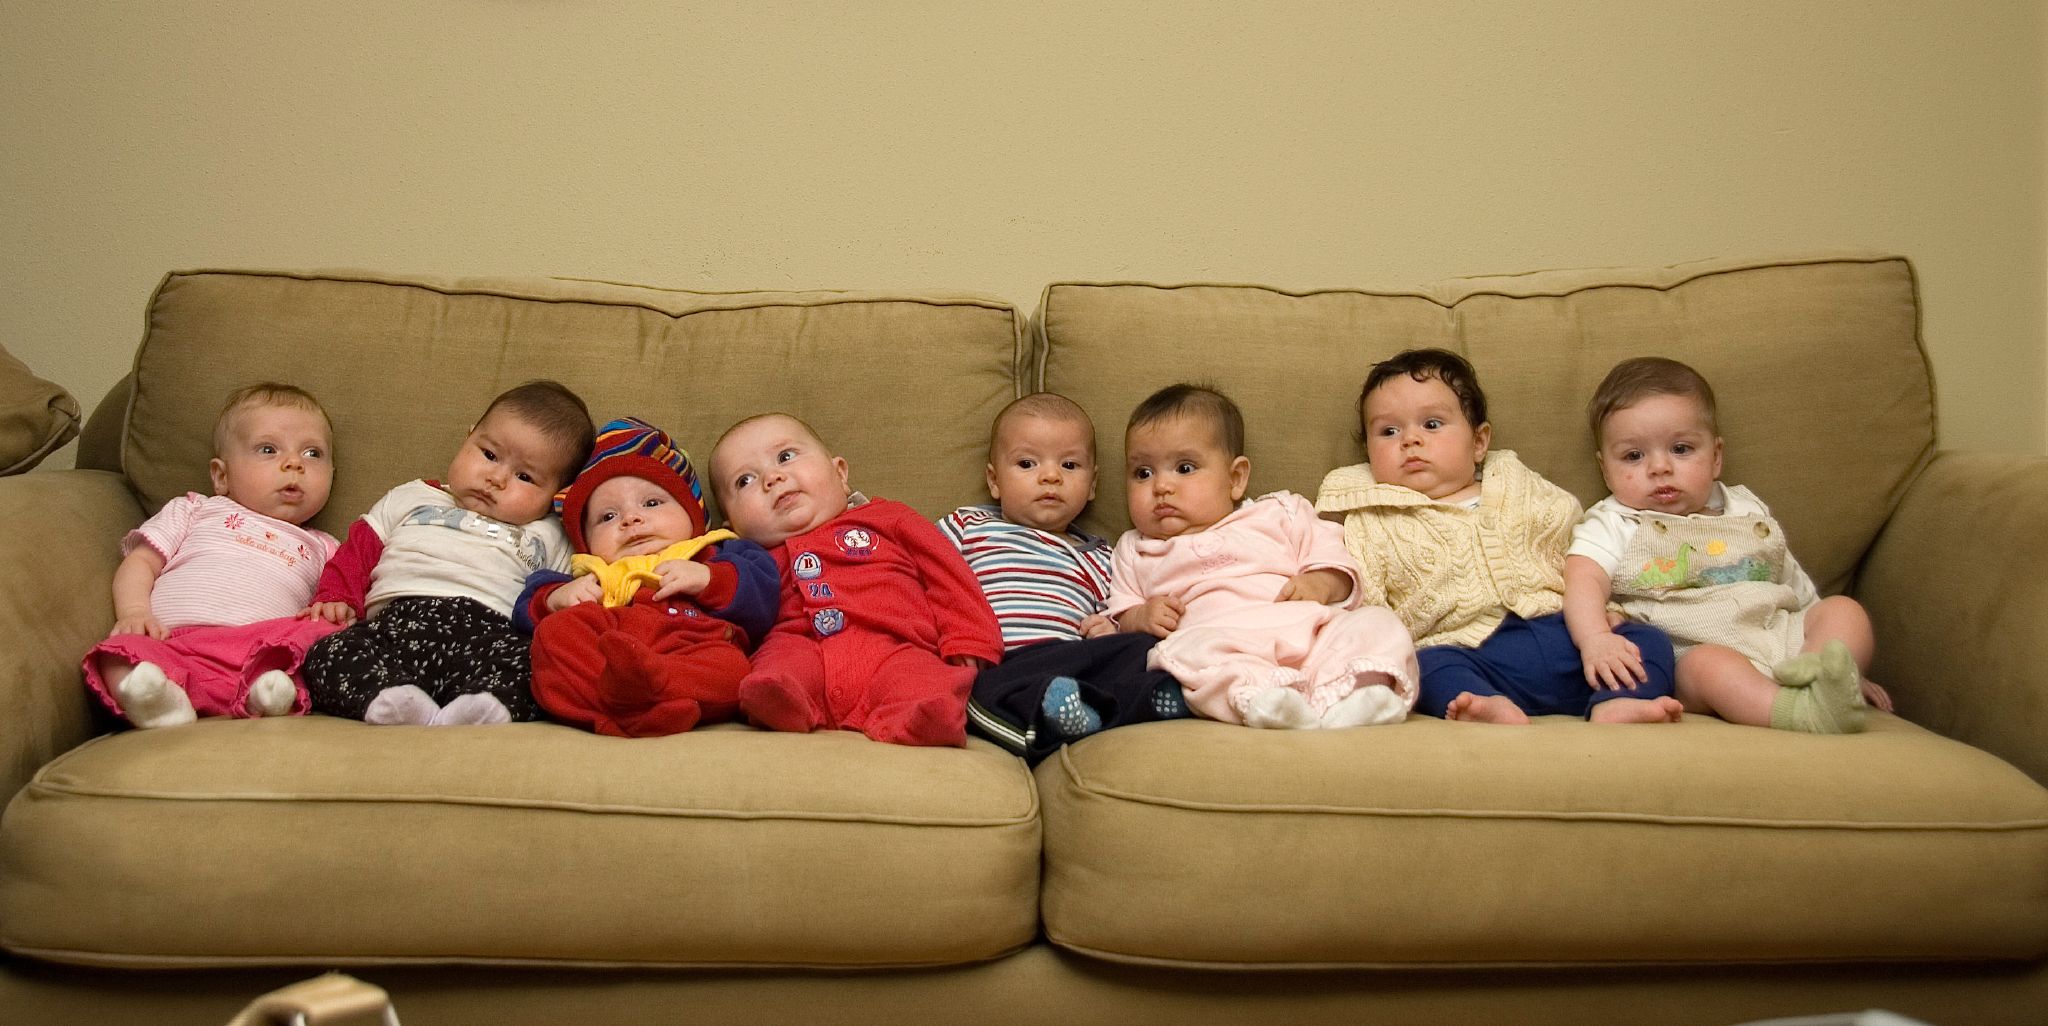 A group of babies on a couch